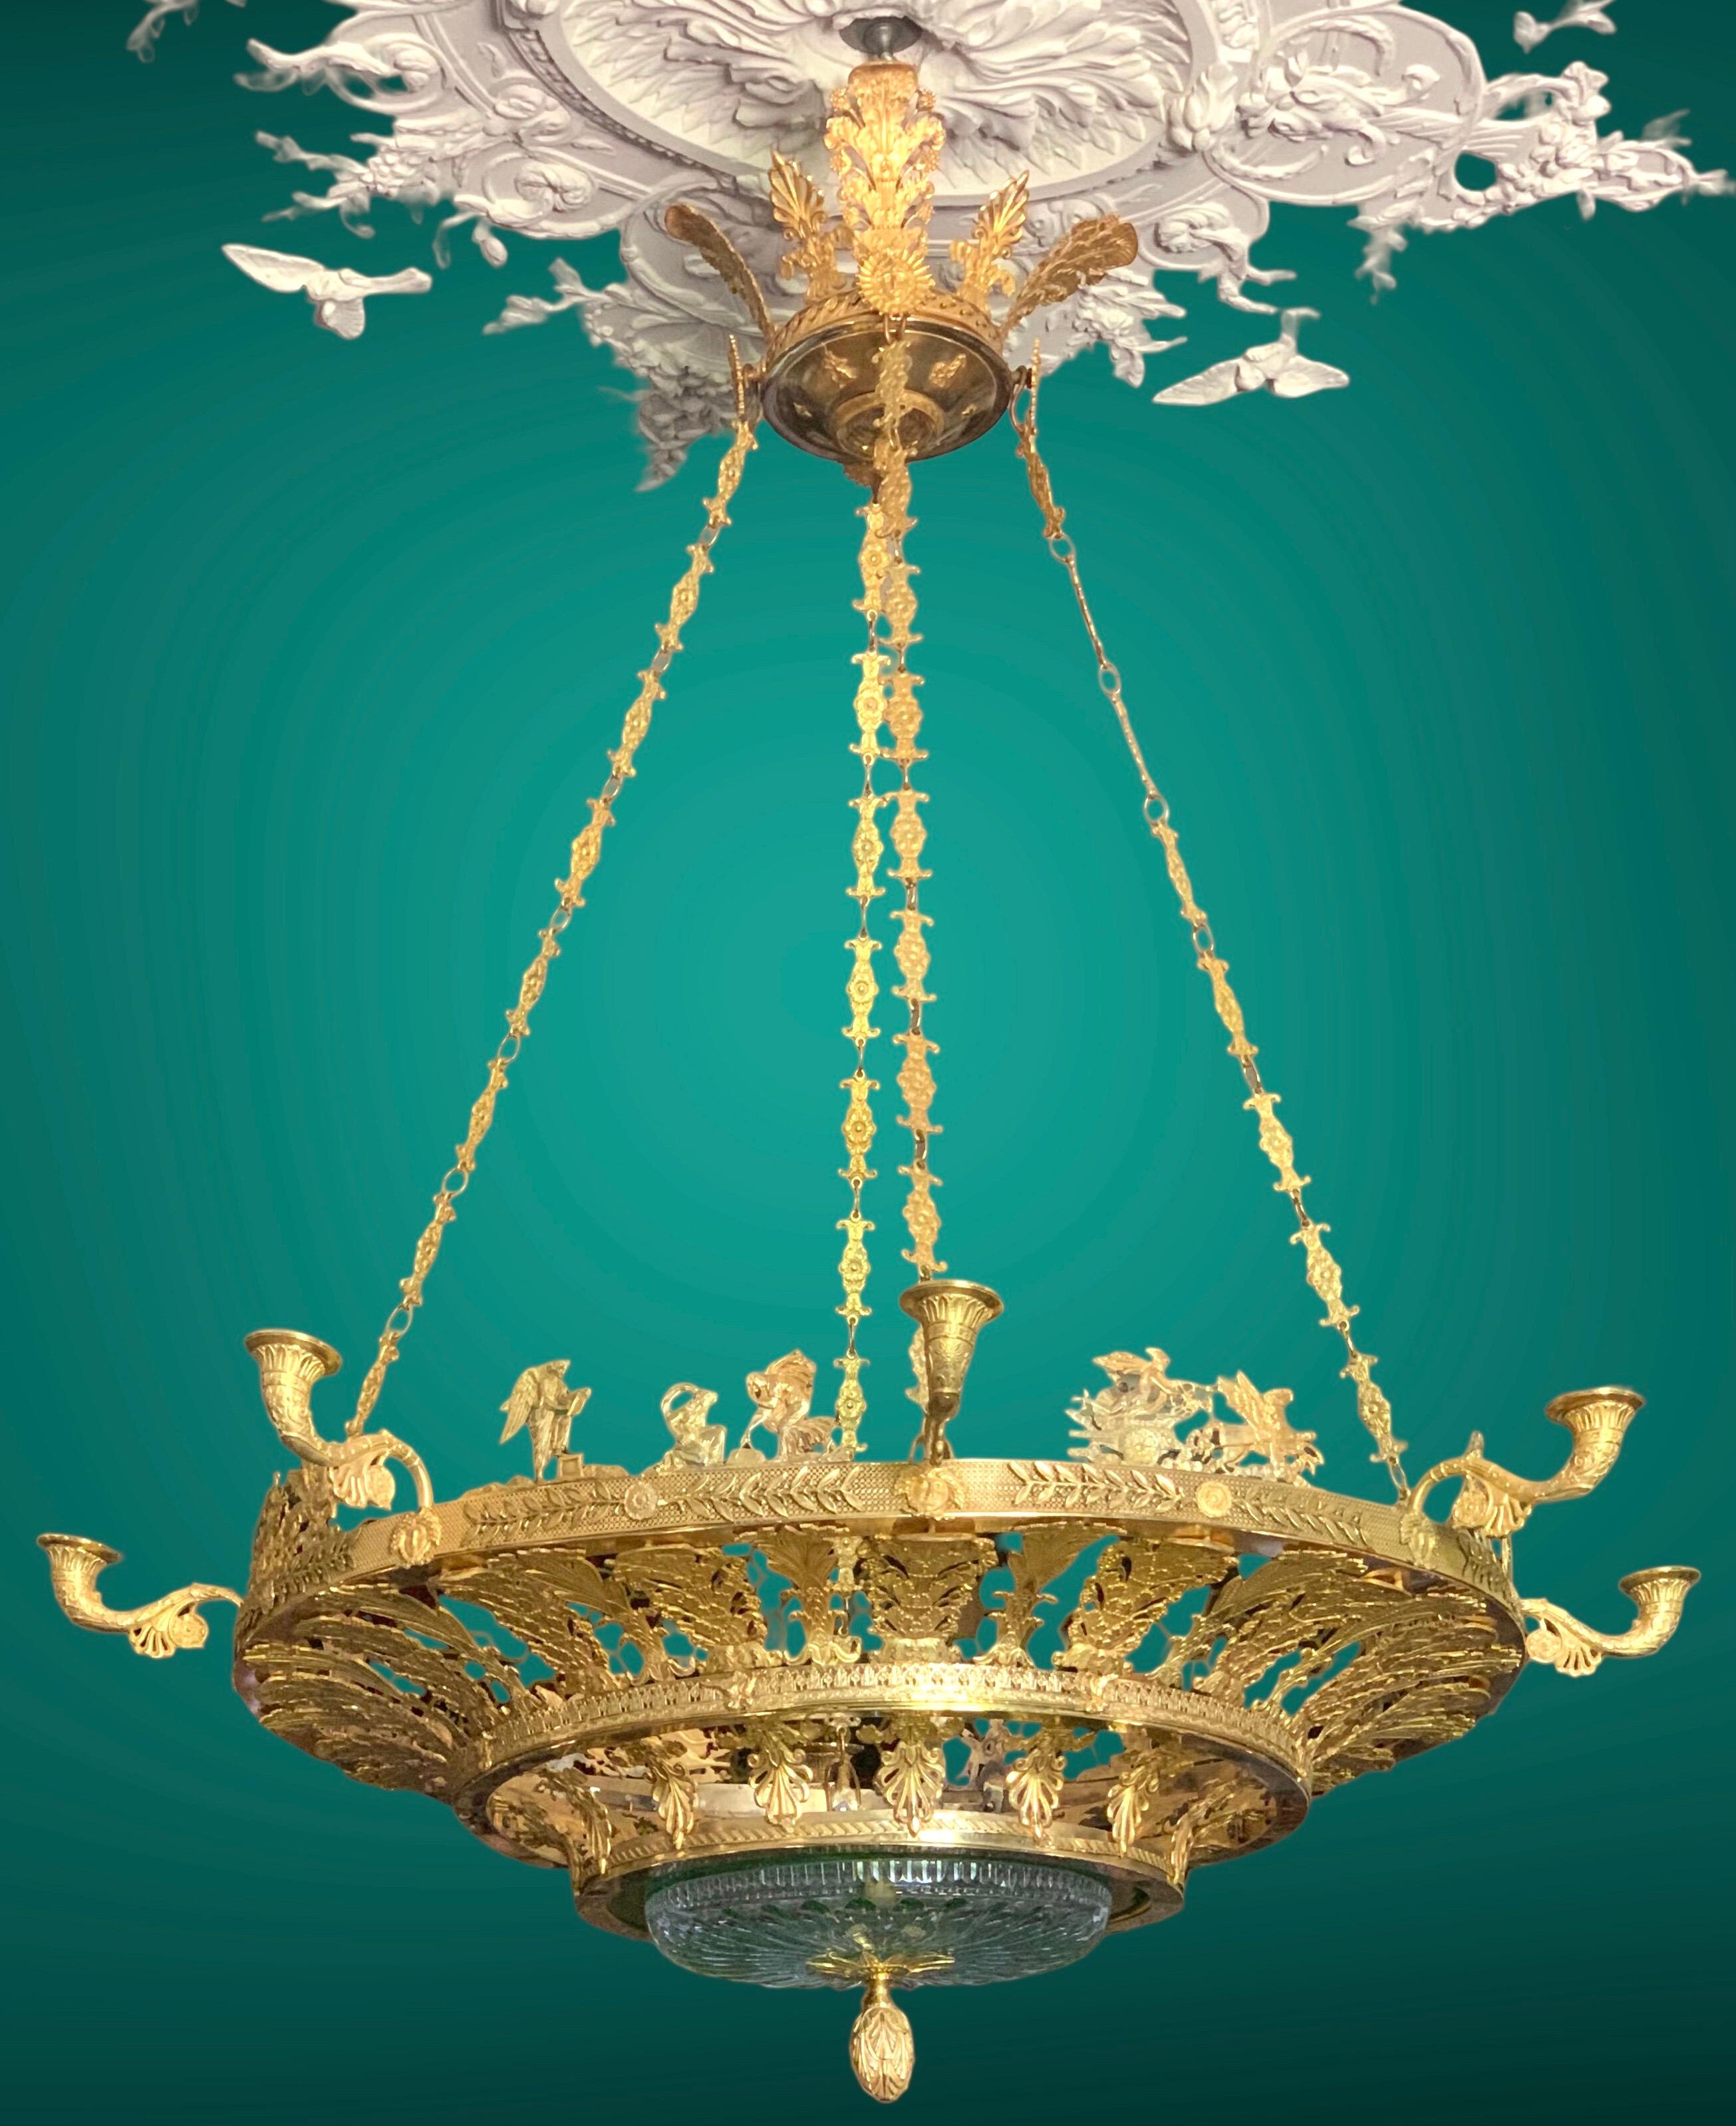 Imposing  Neo-classical chandelier in pure Empire style, with castpalmettes motifs and mythological figures in fine gilded bronze
In the center, a green cut  crystal cup support  a massive bronze seed
8 lights arms  easy to electrify on demand